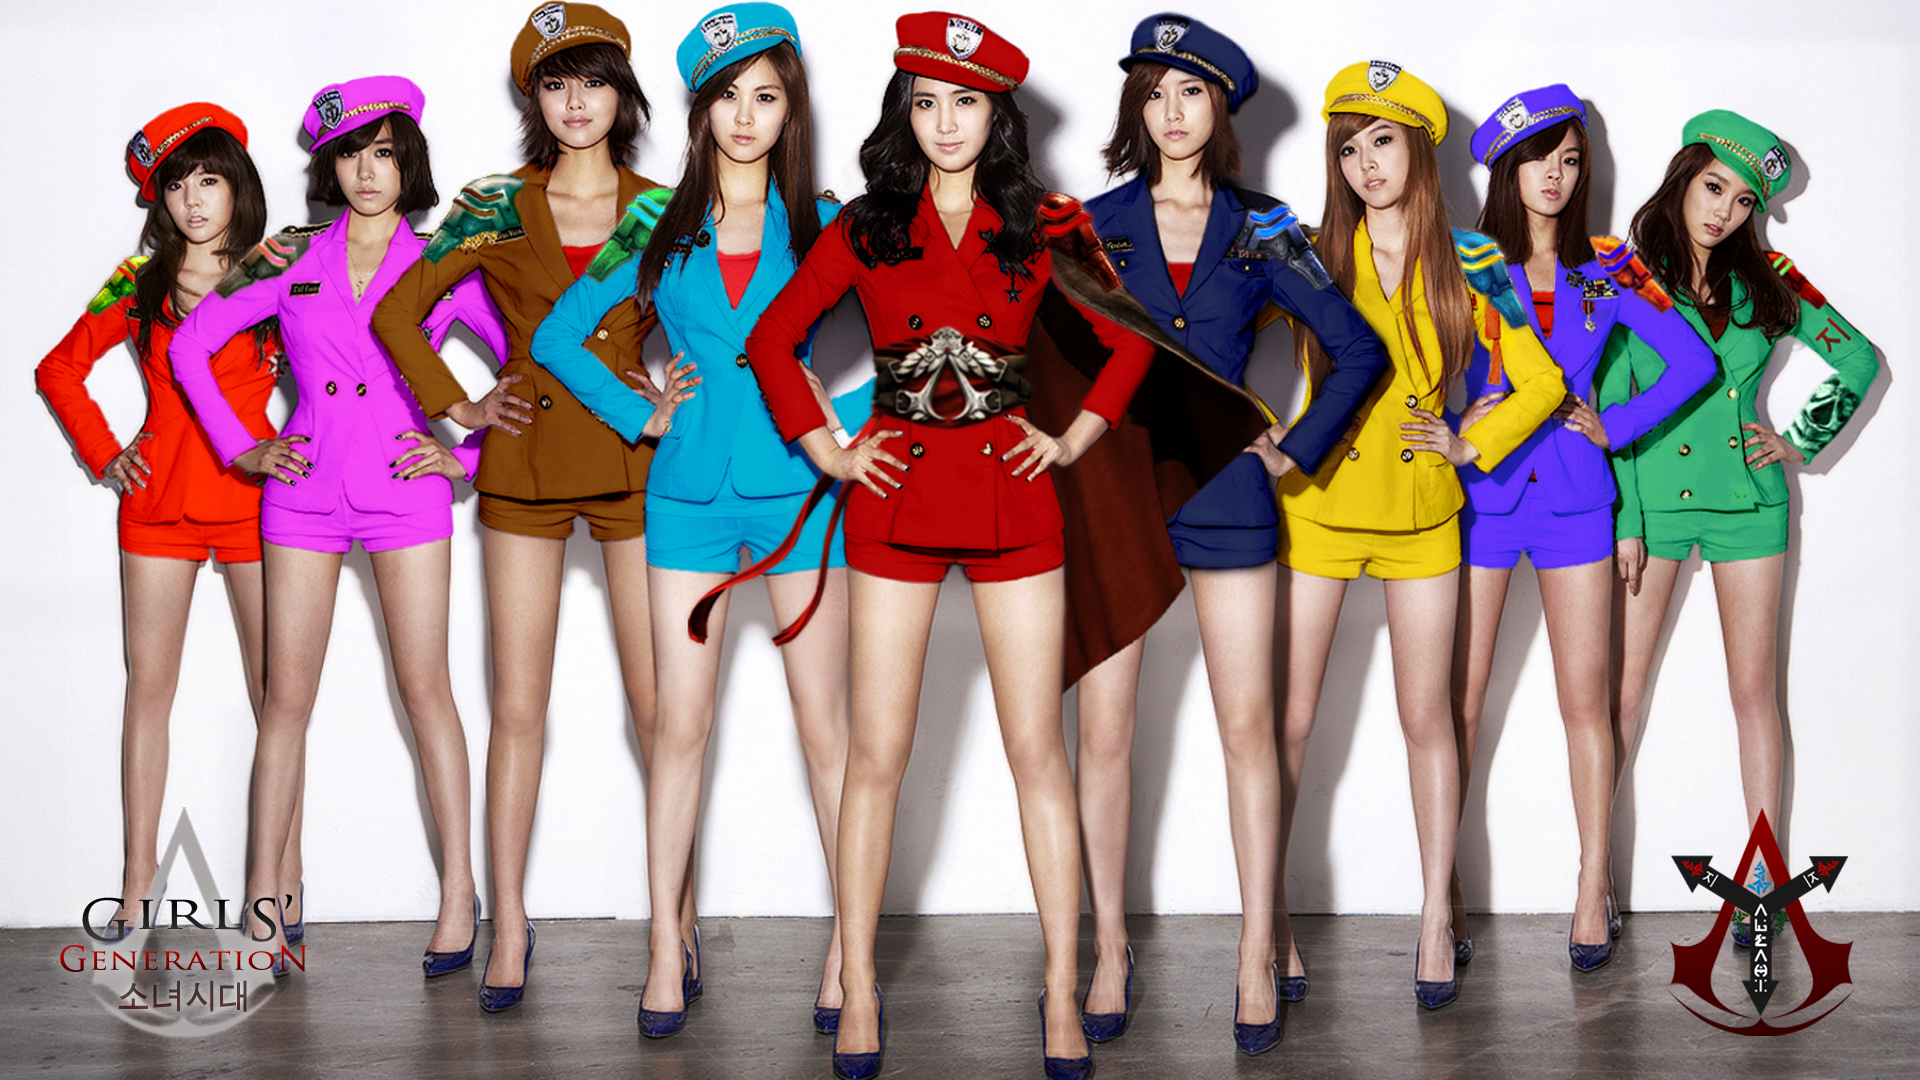 Download this Girls Generation picture